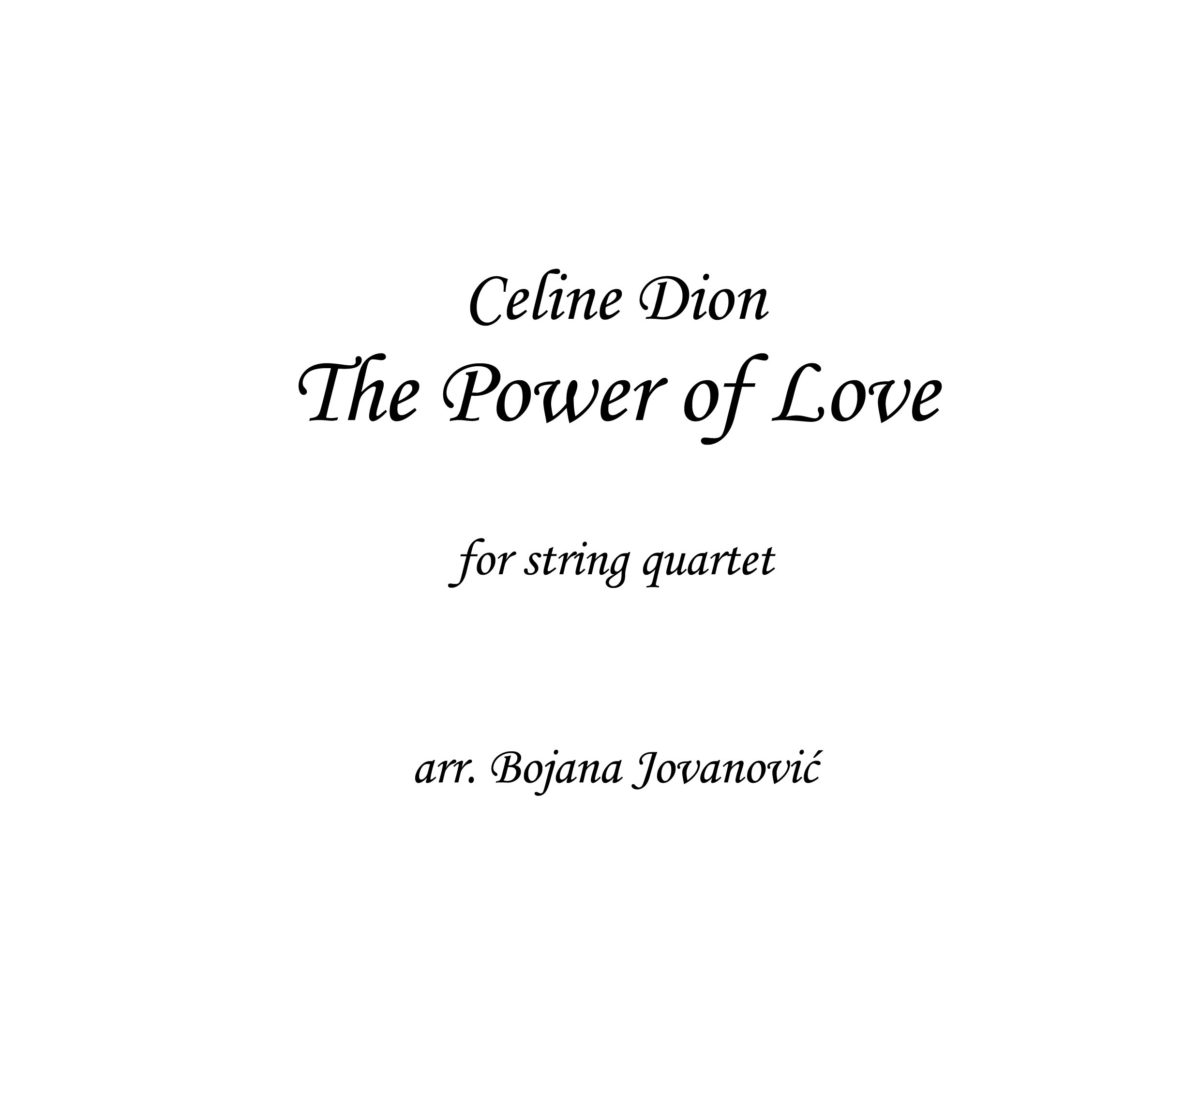 The Power of Love (Celine Dion) - Sheet Music